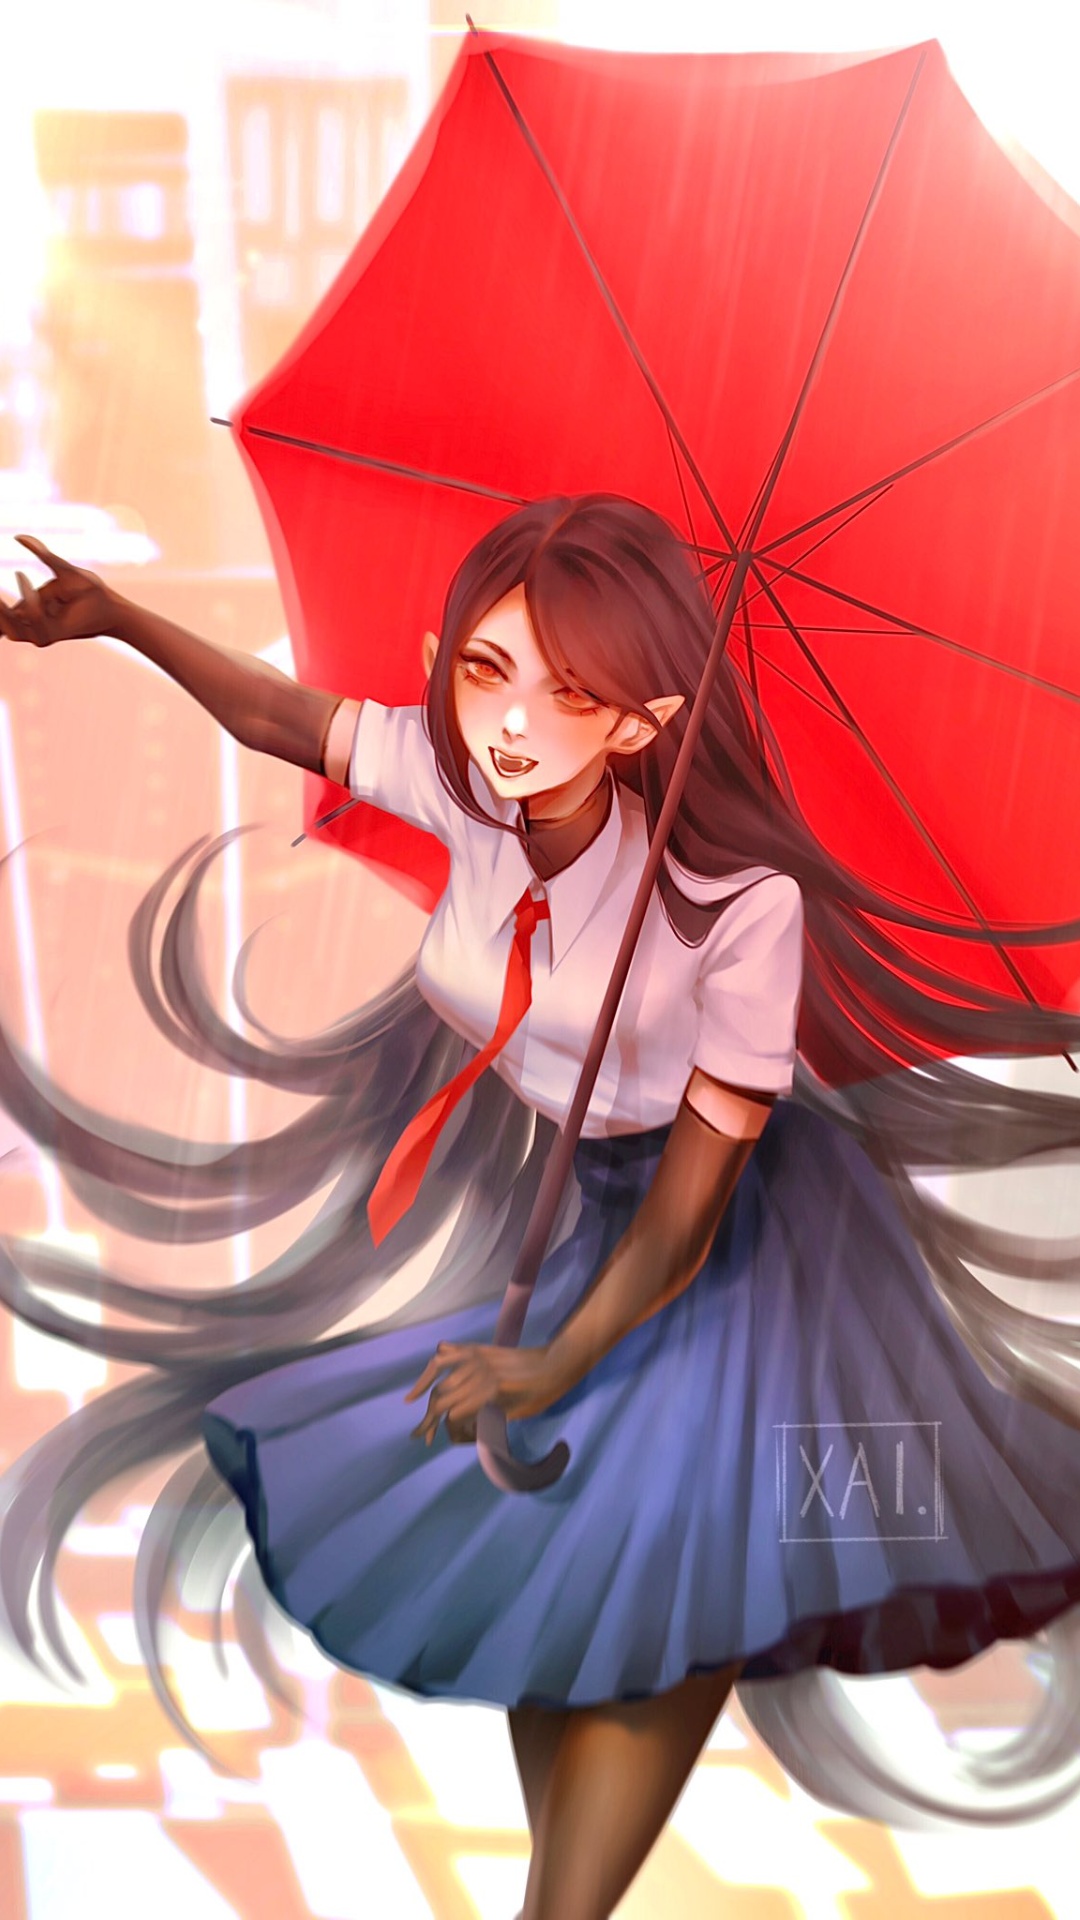 Anime Girl With Umbrella Images